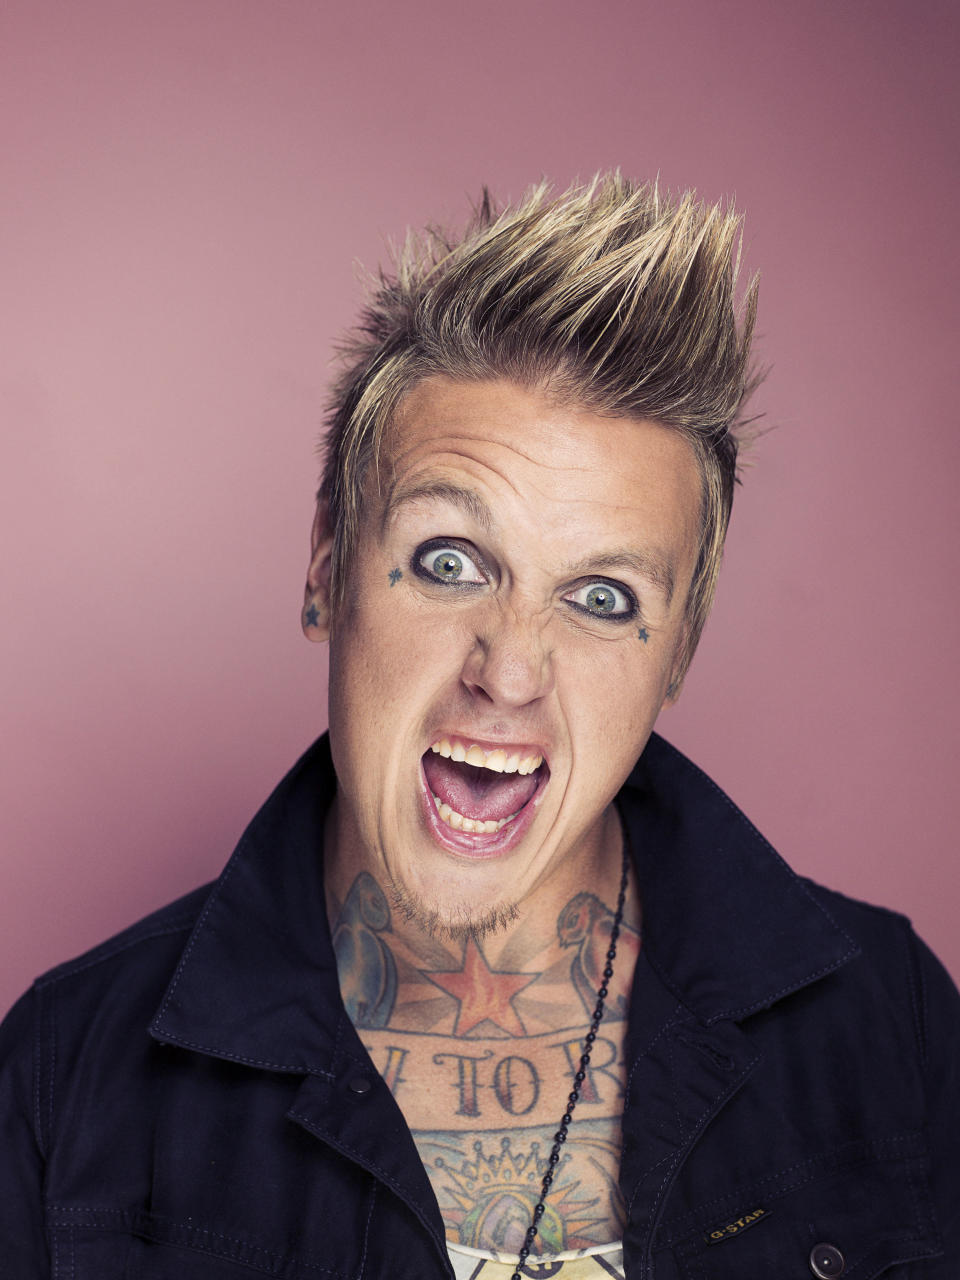 This Sept. 20, 2012 photo shows Jacoby Shaddix, lead singer of the American rock band Papa Roach, posing for a portrait in New York. Papa Roach is releasing their new album, "The Connection," on Oct. 2. (Photo by Victoria Will/Invision/AP)